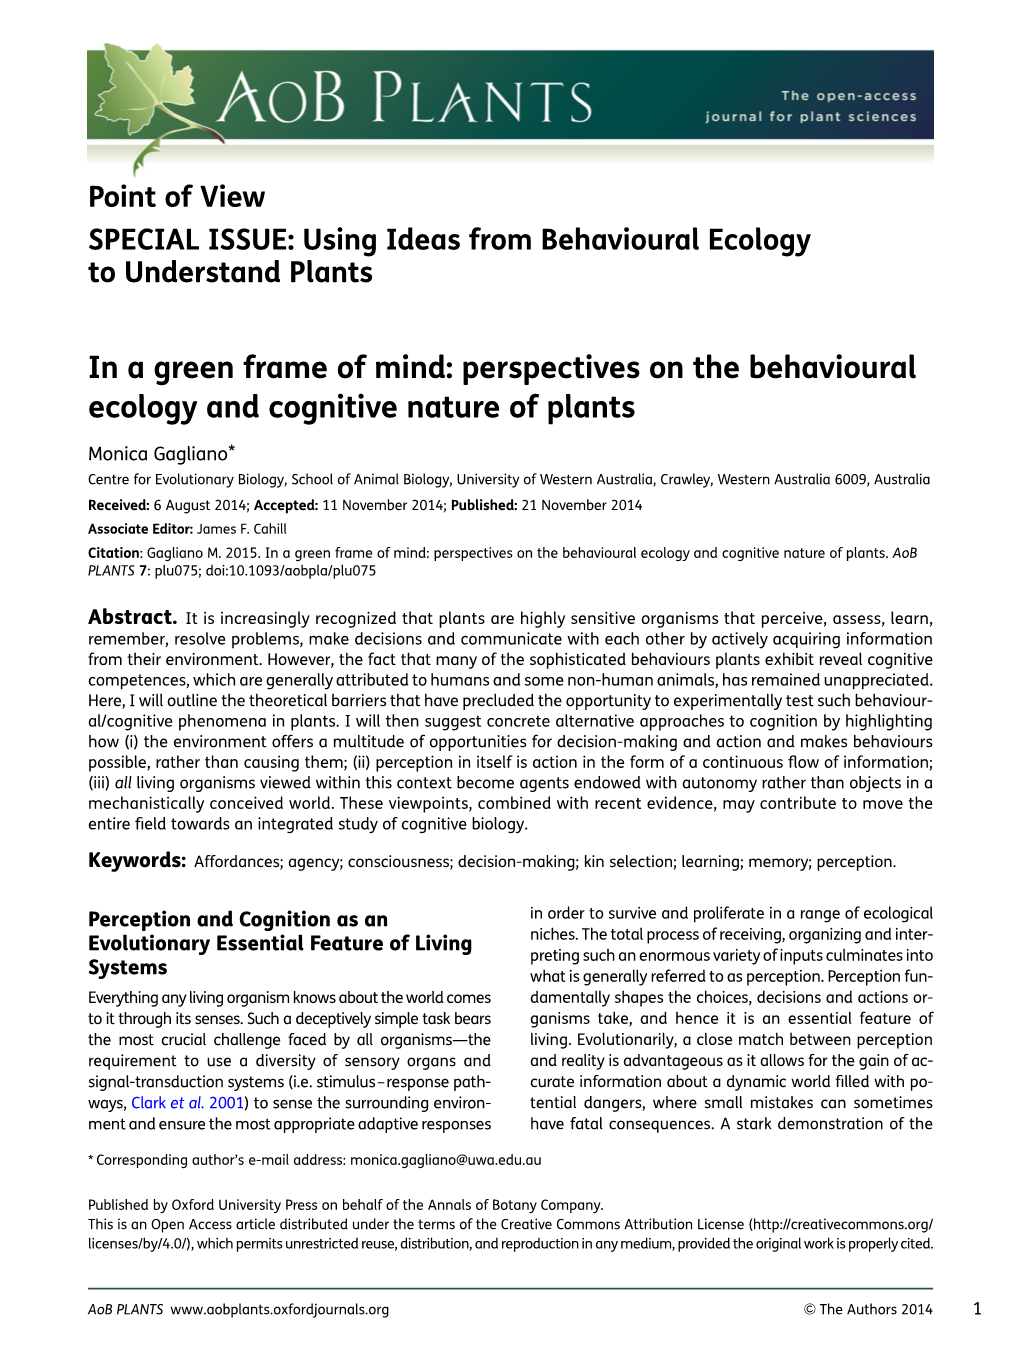 Perspectives on the Behavioural Ecology and Cognitive Nature of Plants